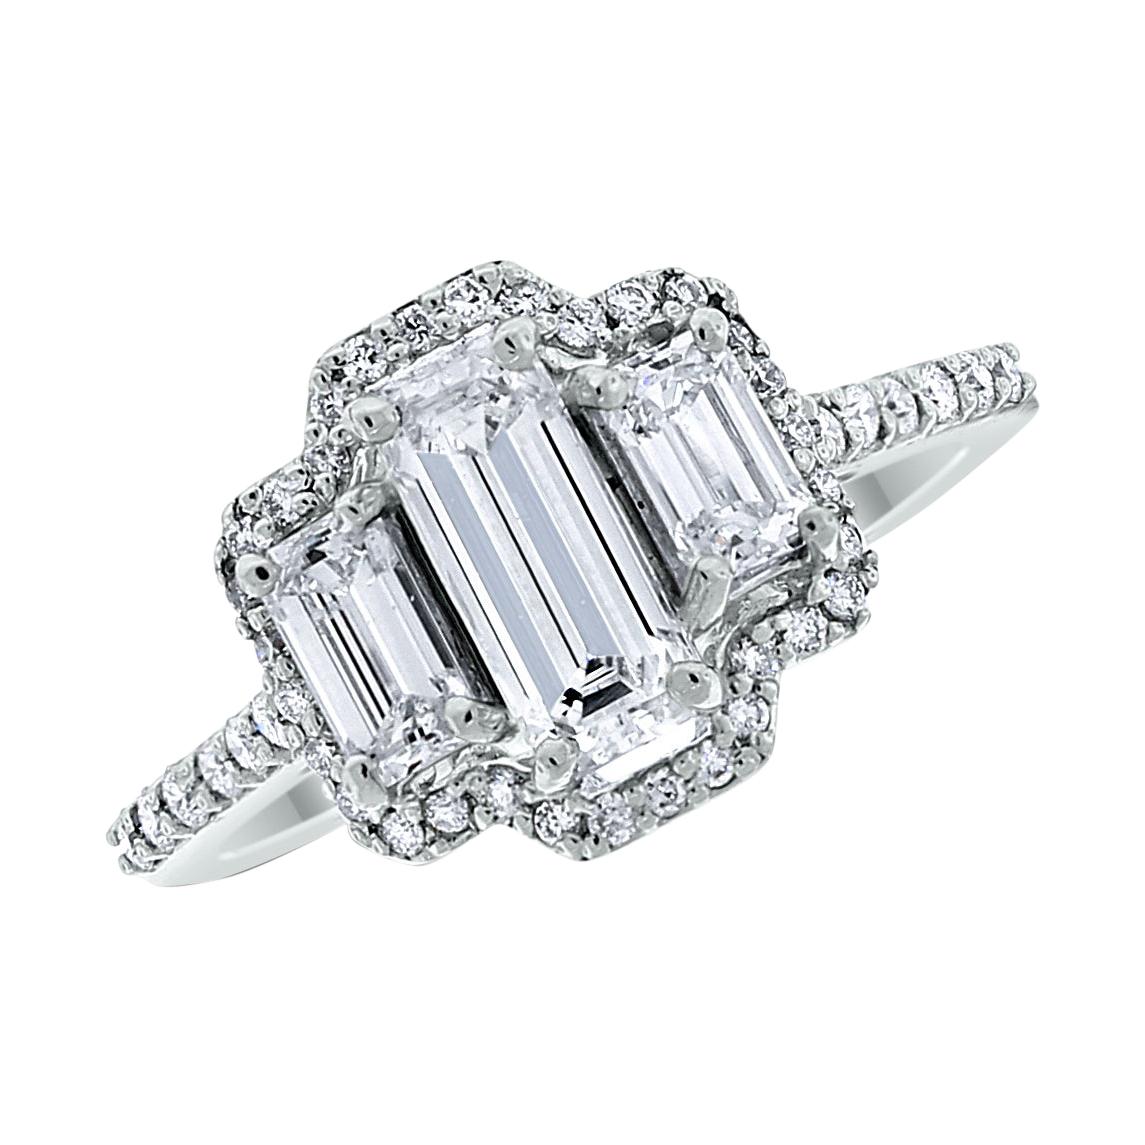 Beauvince Diana Engagement Ring 1.28 Carat Diamonds in White Gold